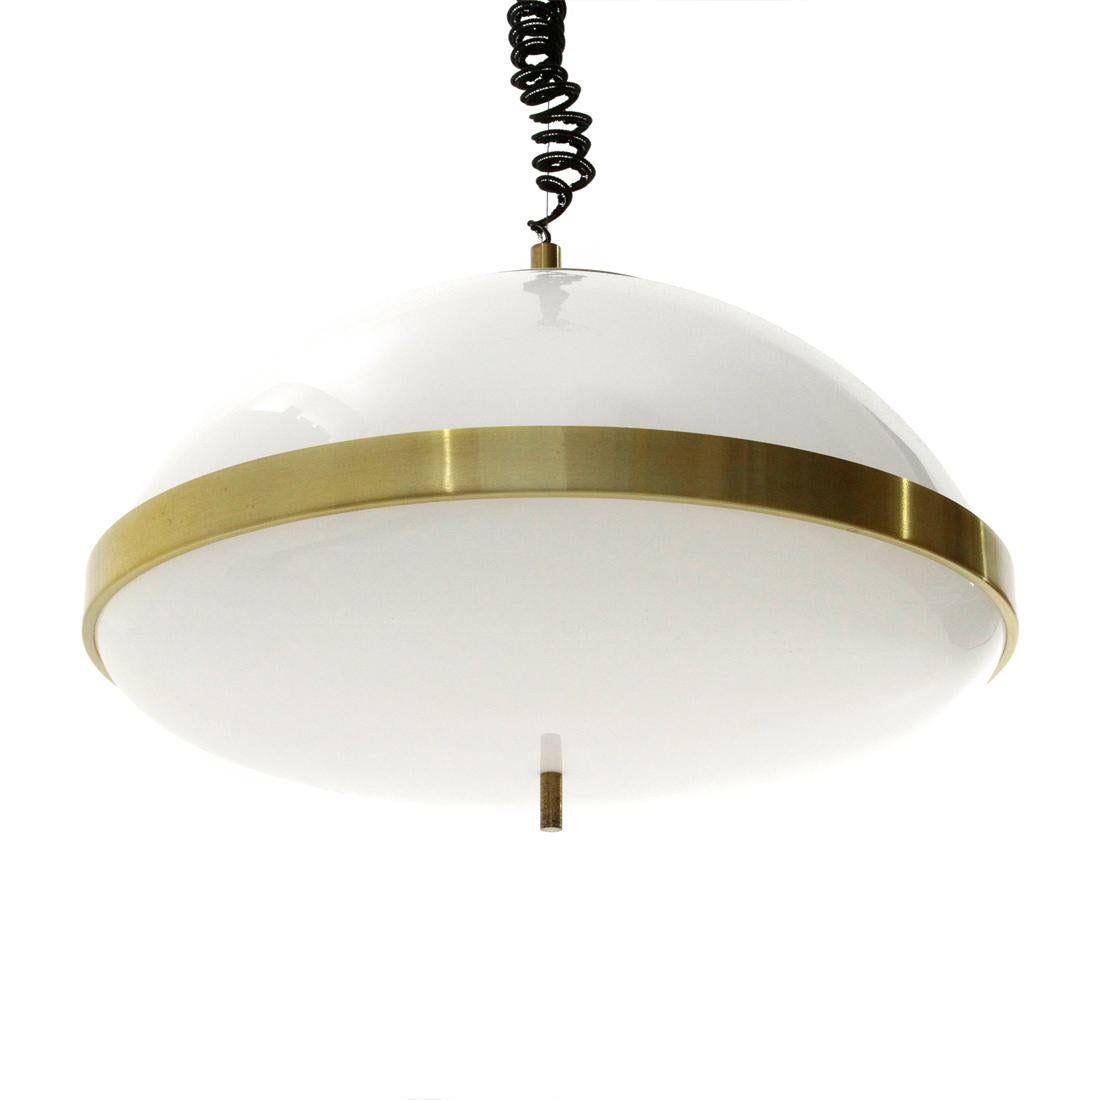 Italian-made chandelier produced in the 1970s.
Brass-plated aluminum ceiling rose.
Curved methacrylate diffuser and brass-plated aluminum.
Good general conditions, some signs due to normal use over time.

Dimensions: Diameter 50 cm - Height 145